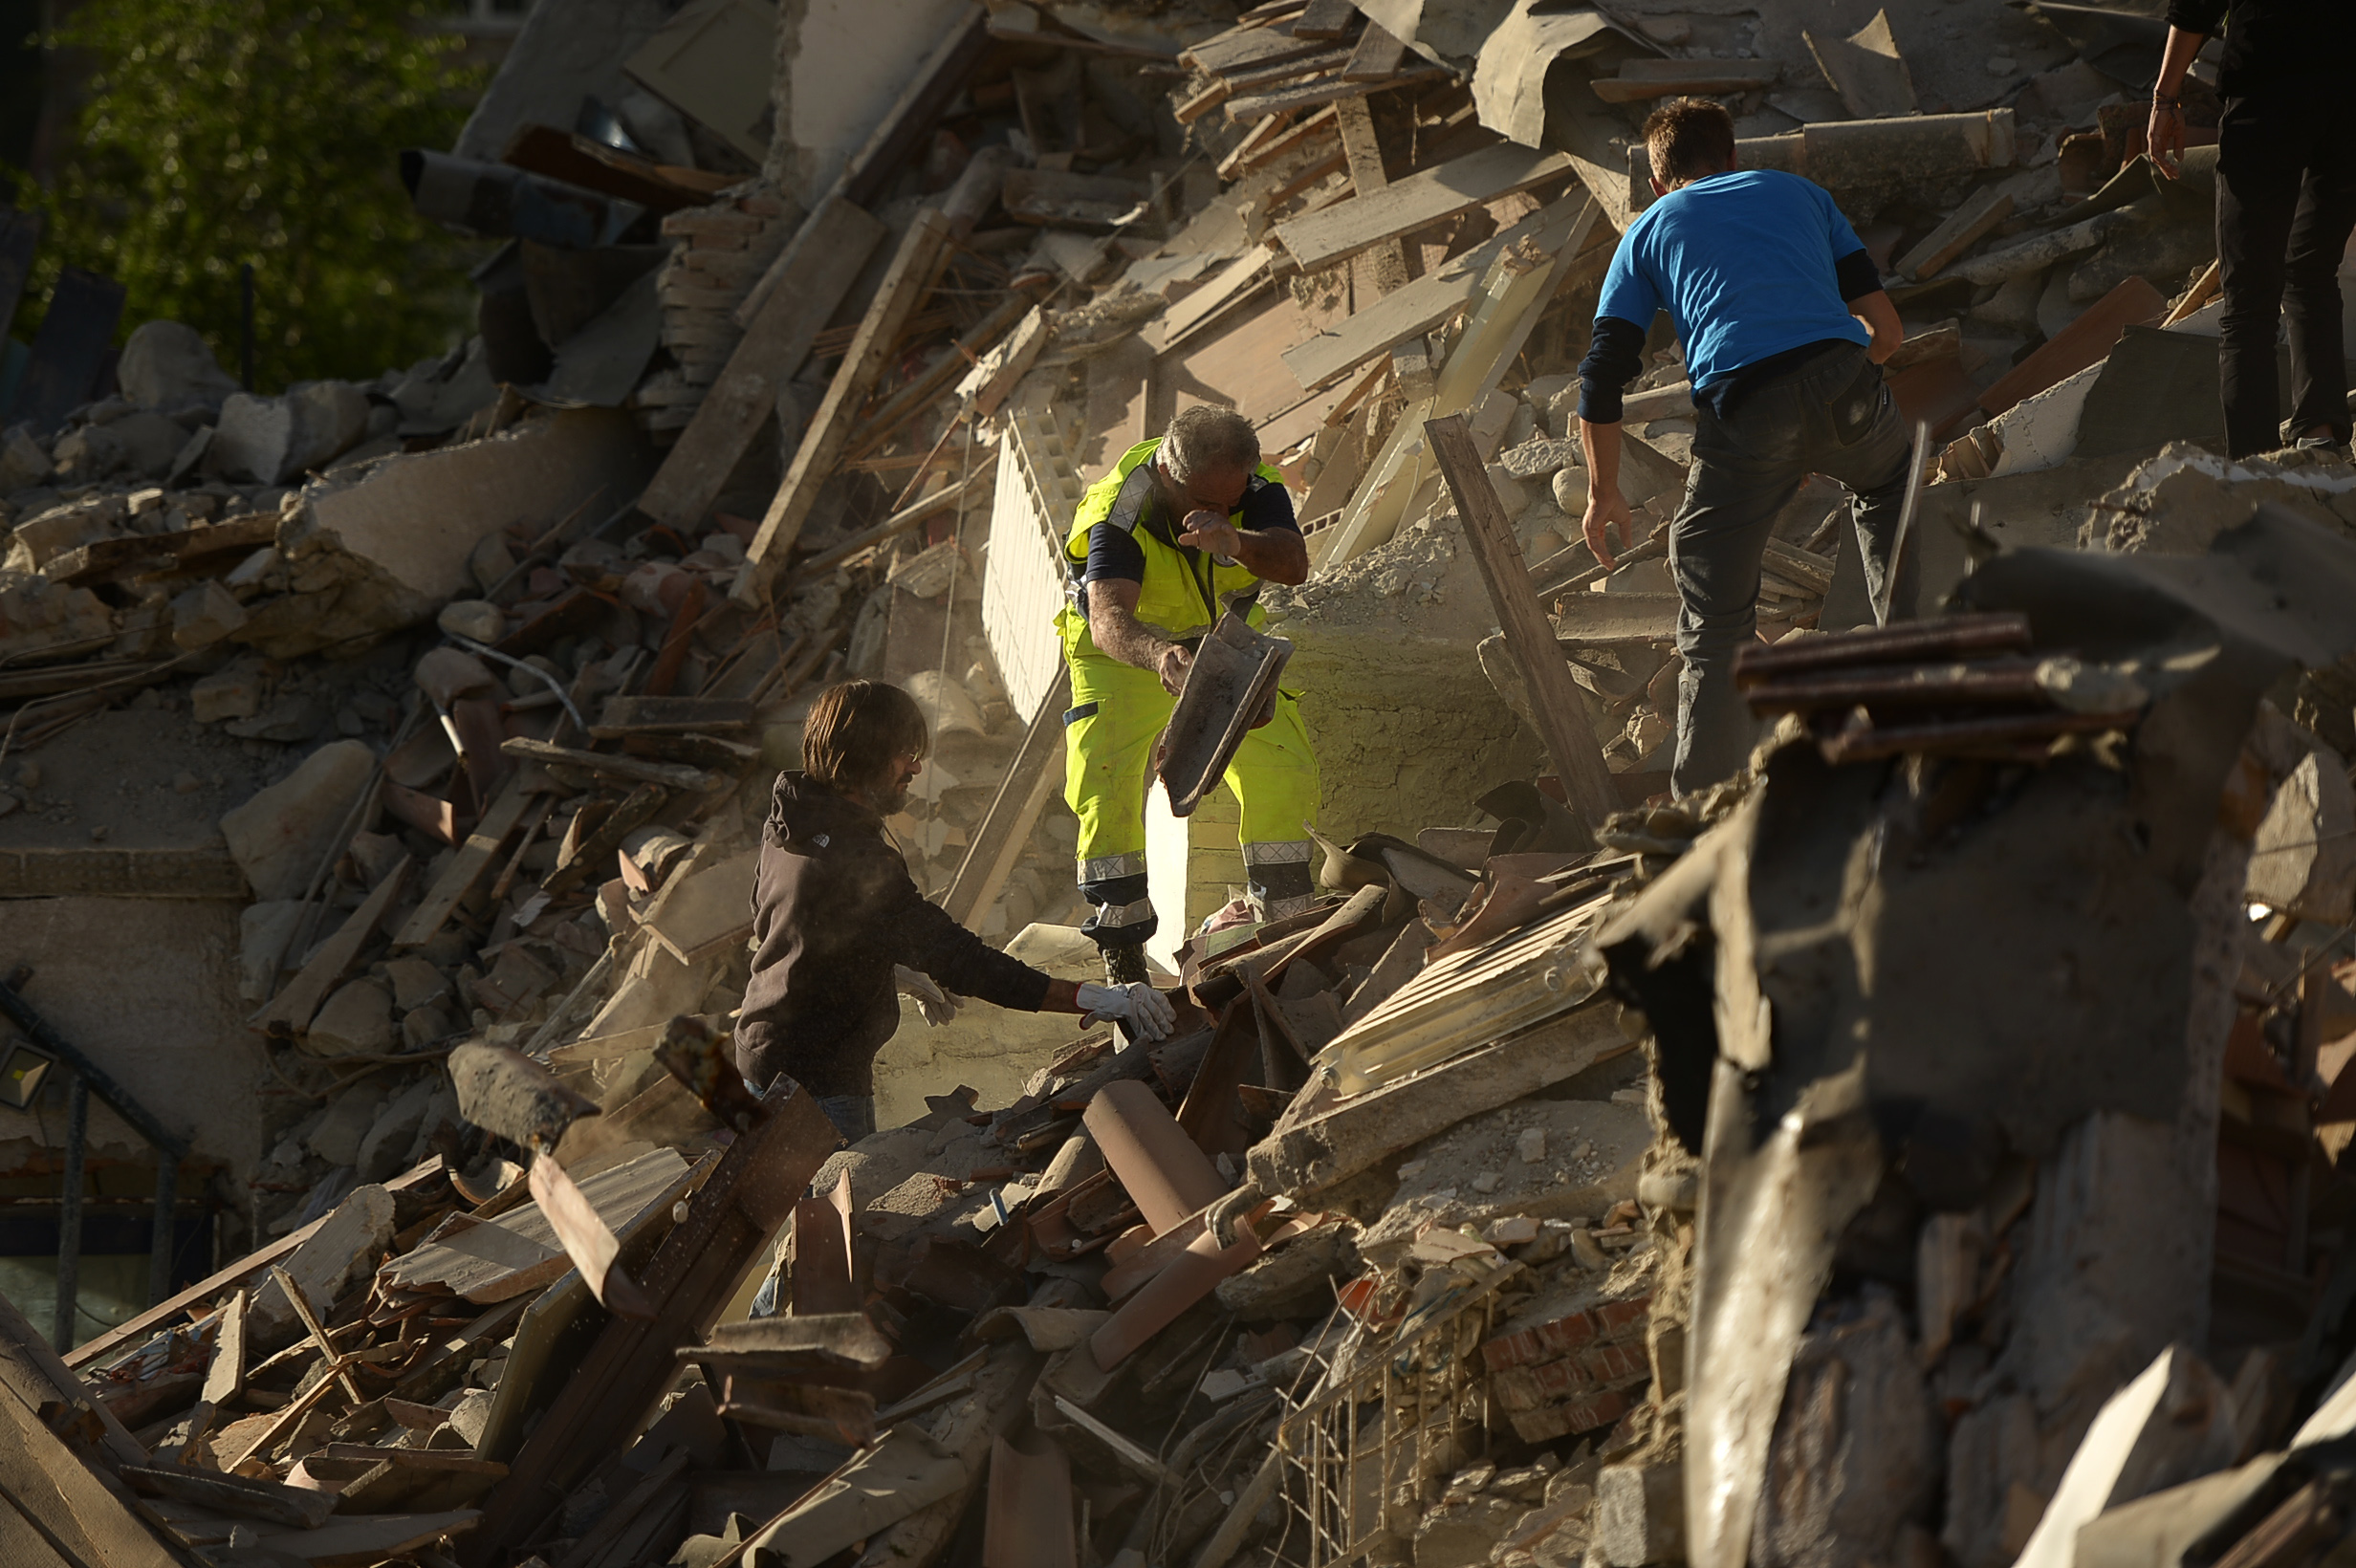 Resucers and residents clear debris in search for victims in damaged homes after a strong heathquake hit Amatrice on August 24, 2016. Central Italy was struck by a powerful, 6.2-magnitude earthquake in the early hours, which has killed at least three people and devastated dozens of mountain villages. Numerous buildings had collapsed in communities close to the epicenter of the quake near the town of Norcia in the region of Umbria, witnesses told Italian media, with an increase in the death toll highly likely. / AFP PHOTO / FILIPPO MONTEFORTE